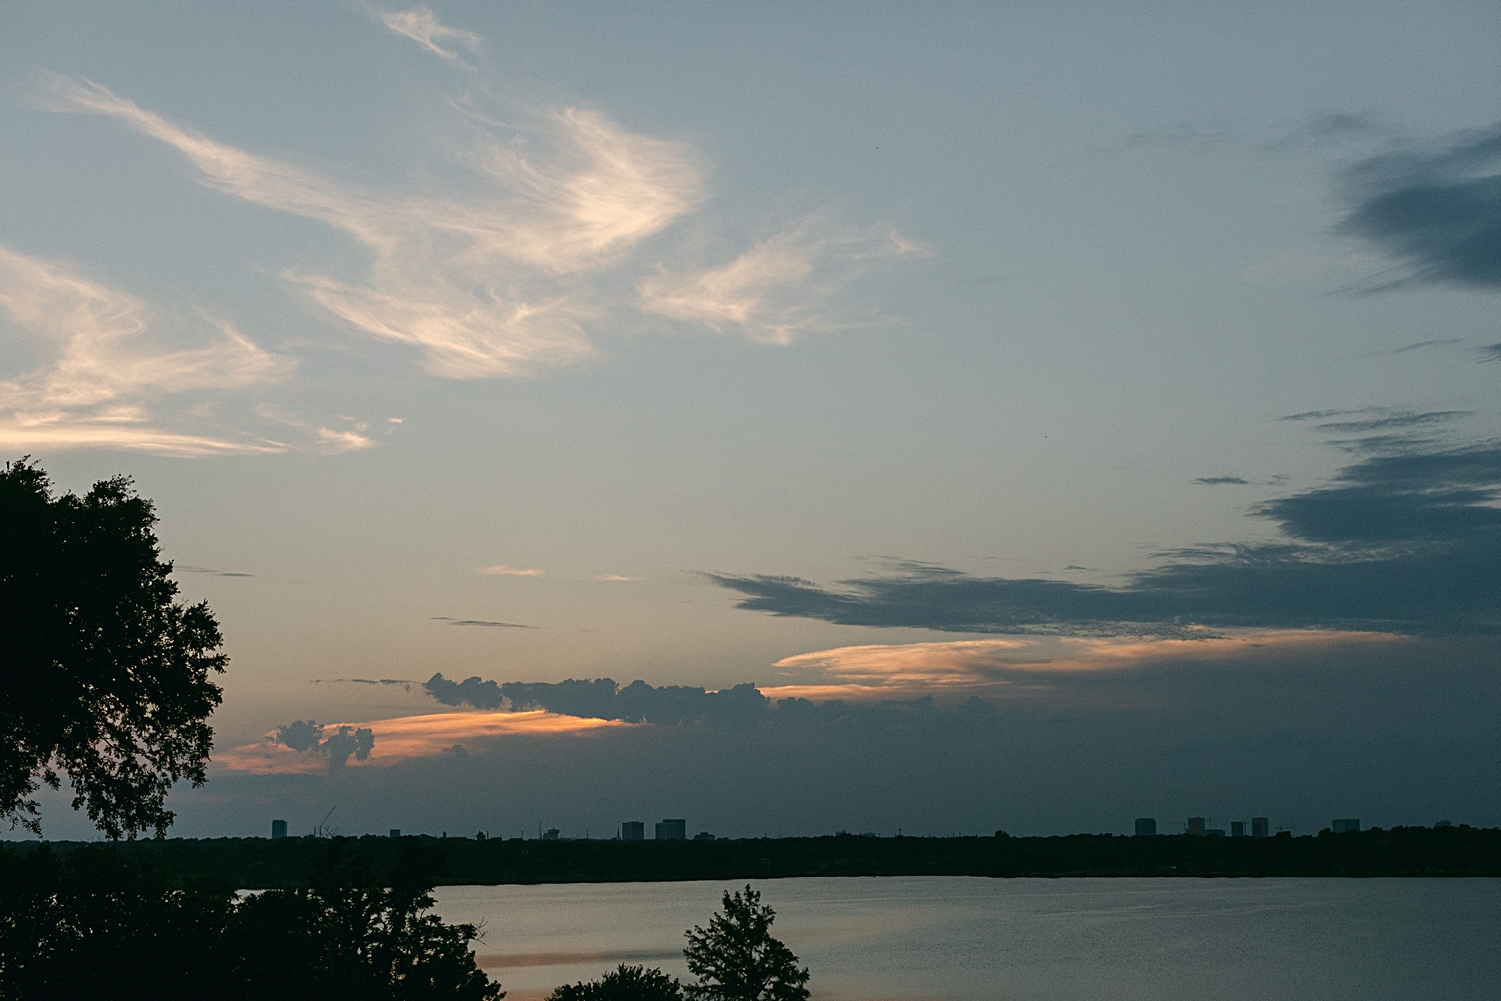 Sunset over White Rock lake in Dallas, Texas